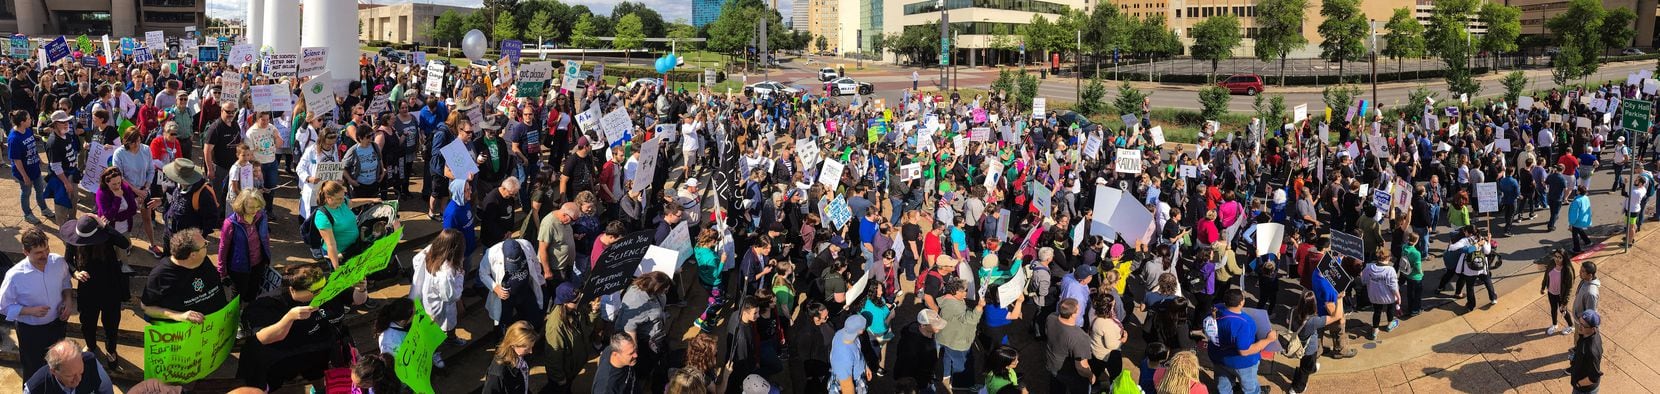 As seen in this panoramic image, the March For Science rally kicked off at Dallas City Hall...